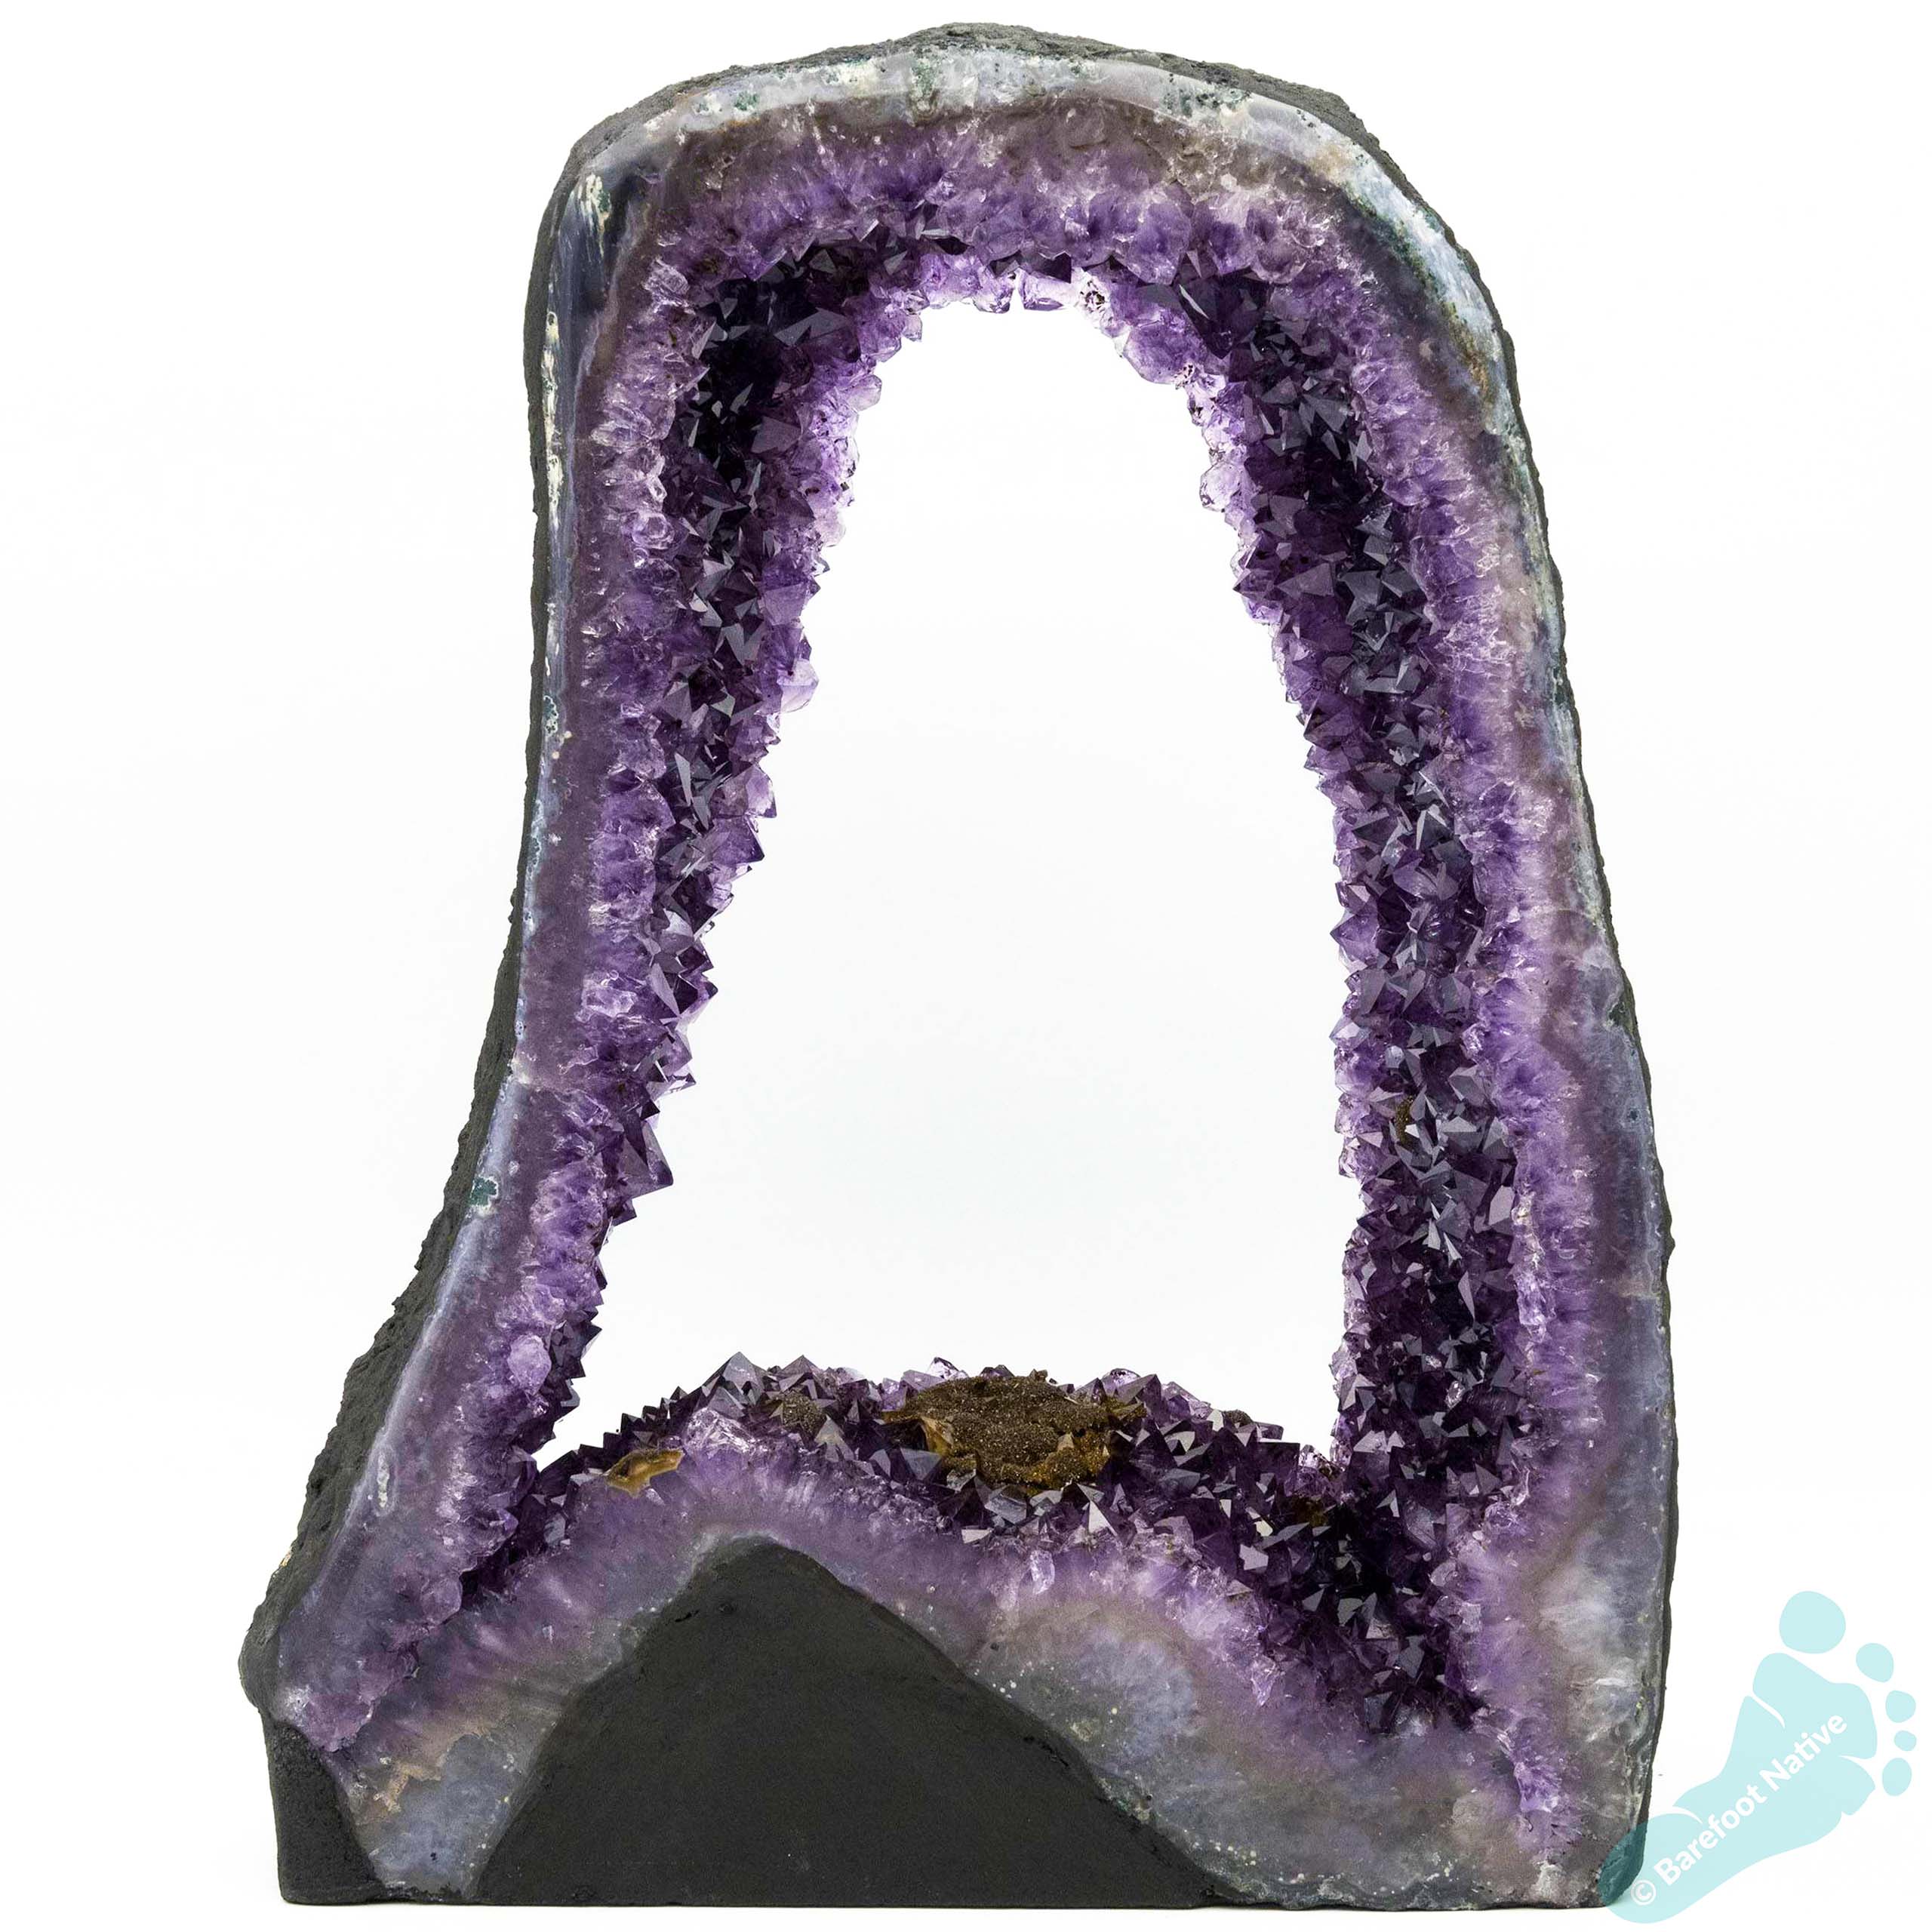 AAA Amethyst Quartz with Druze Goethite Cathedral